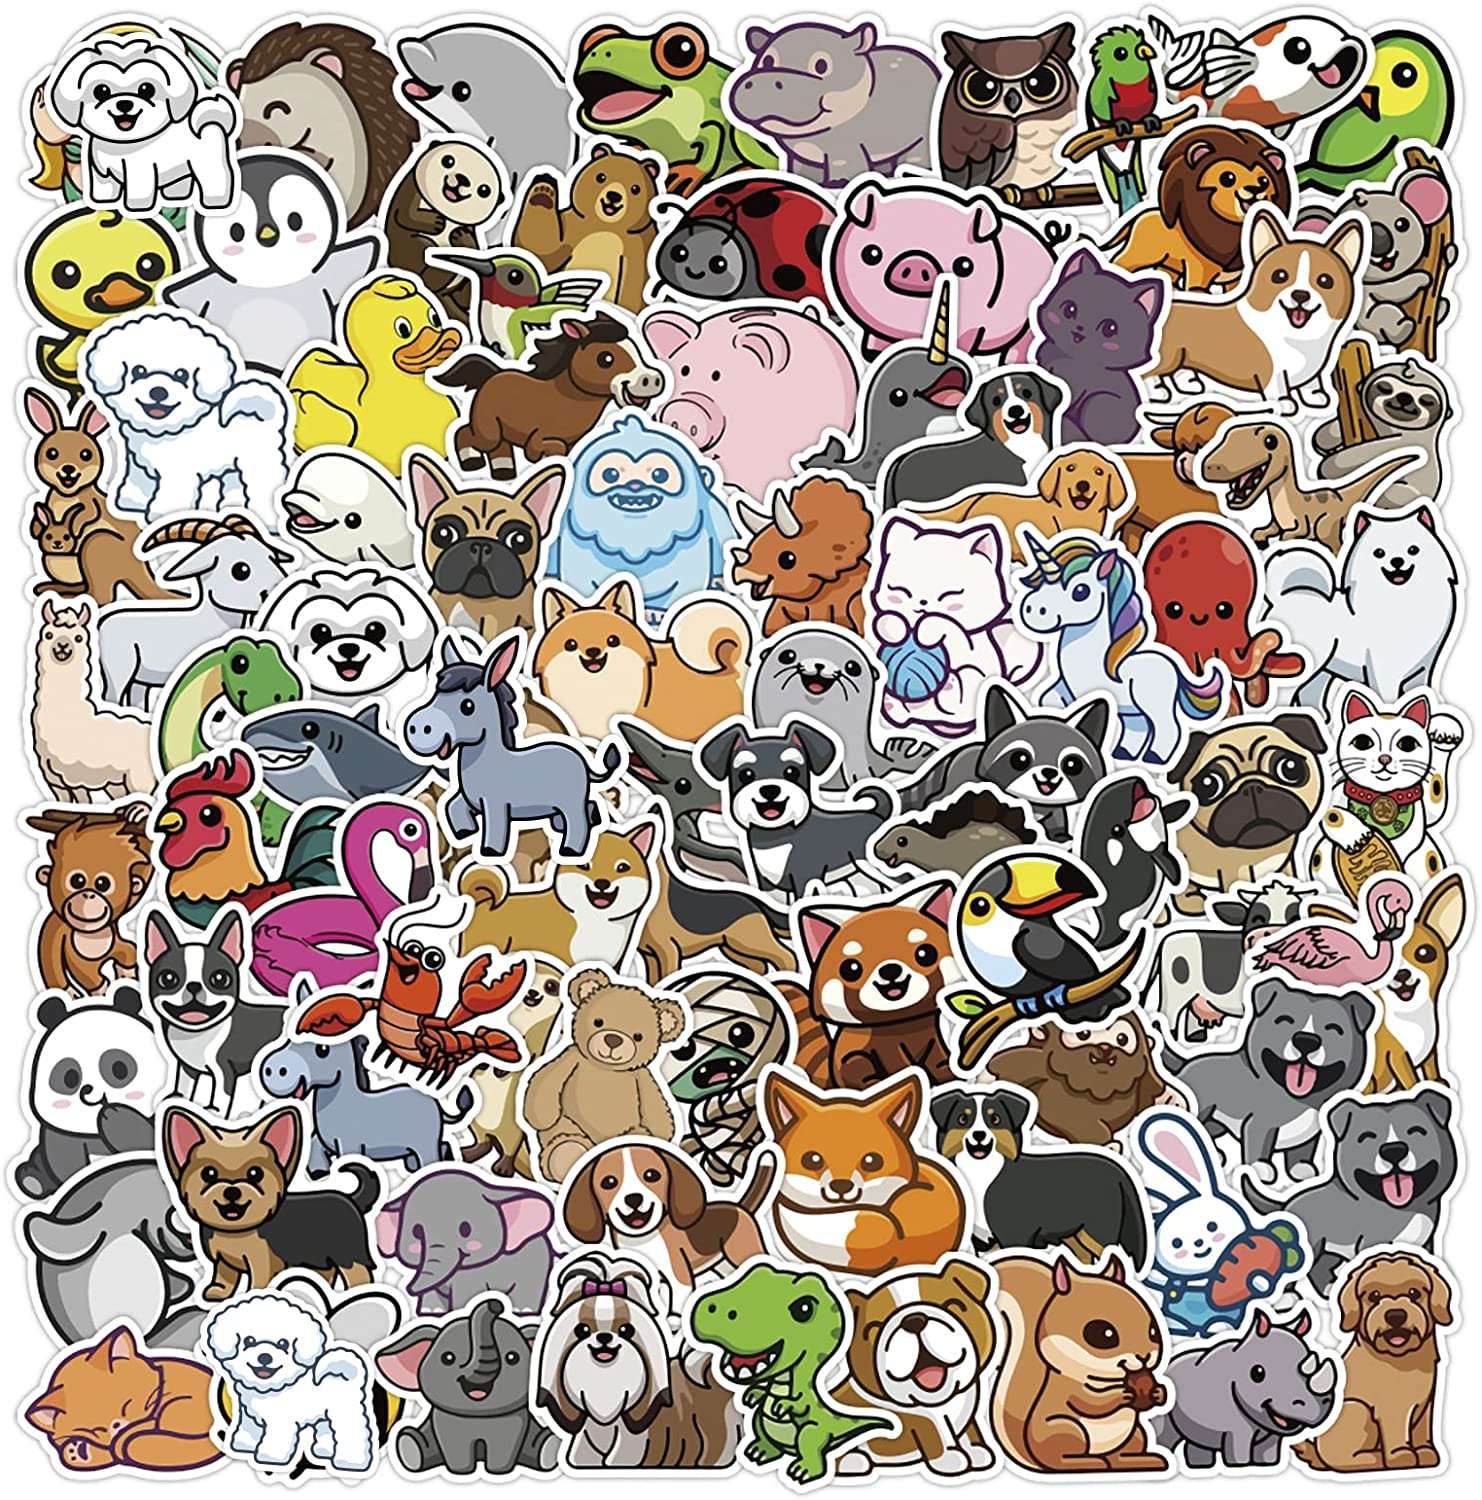 The Cute Nature Animal Stickers is an indie and perfect sticker